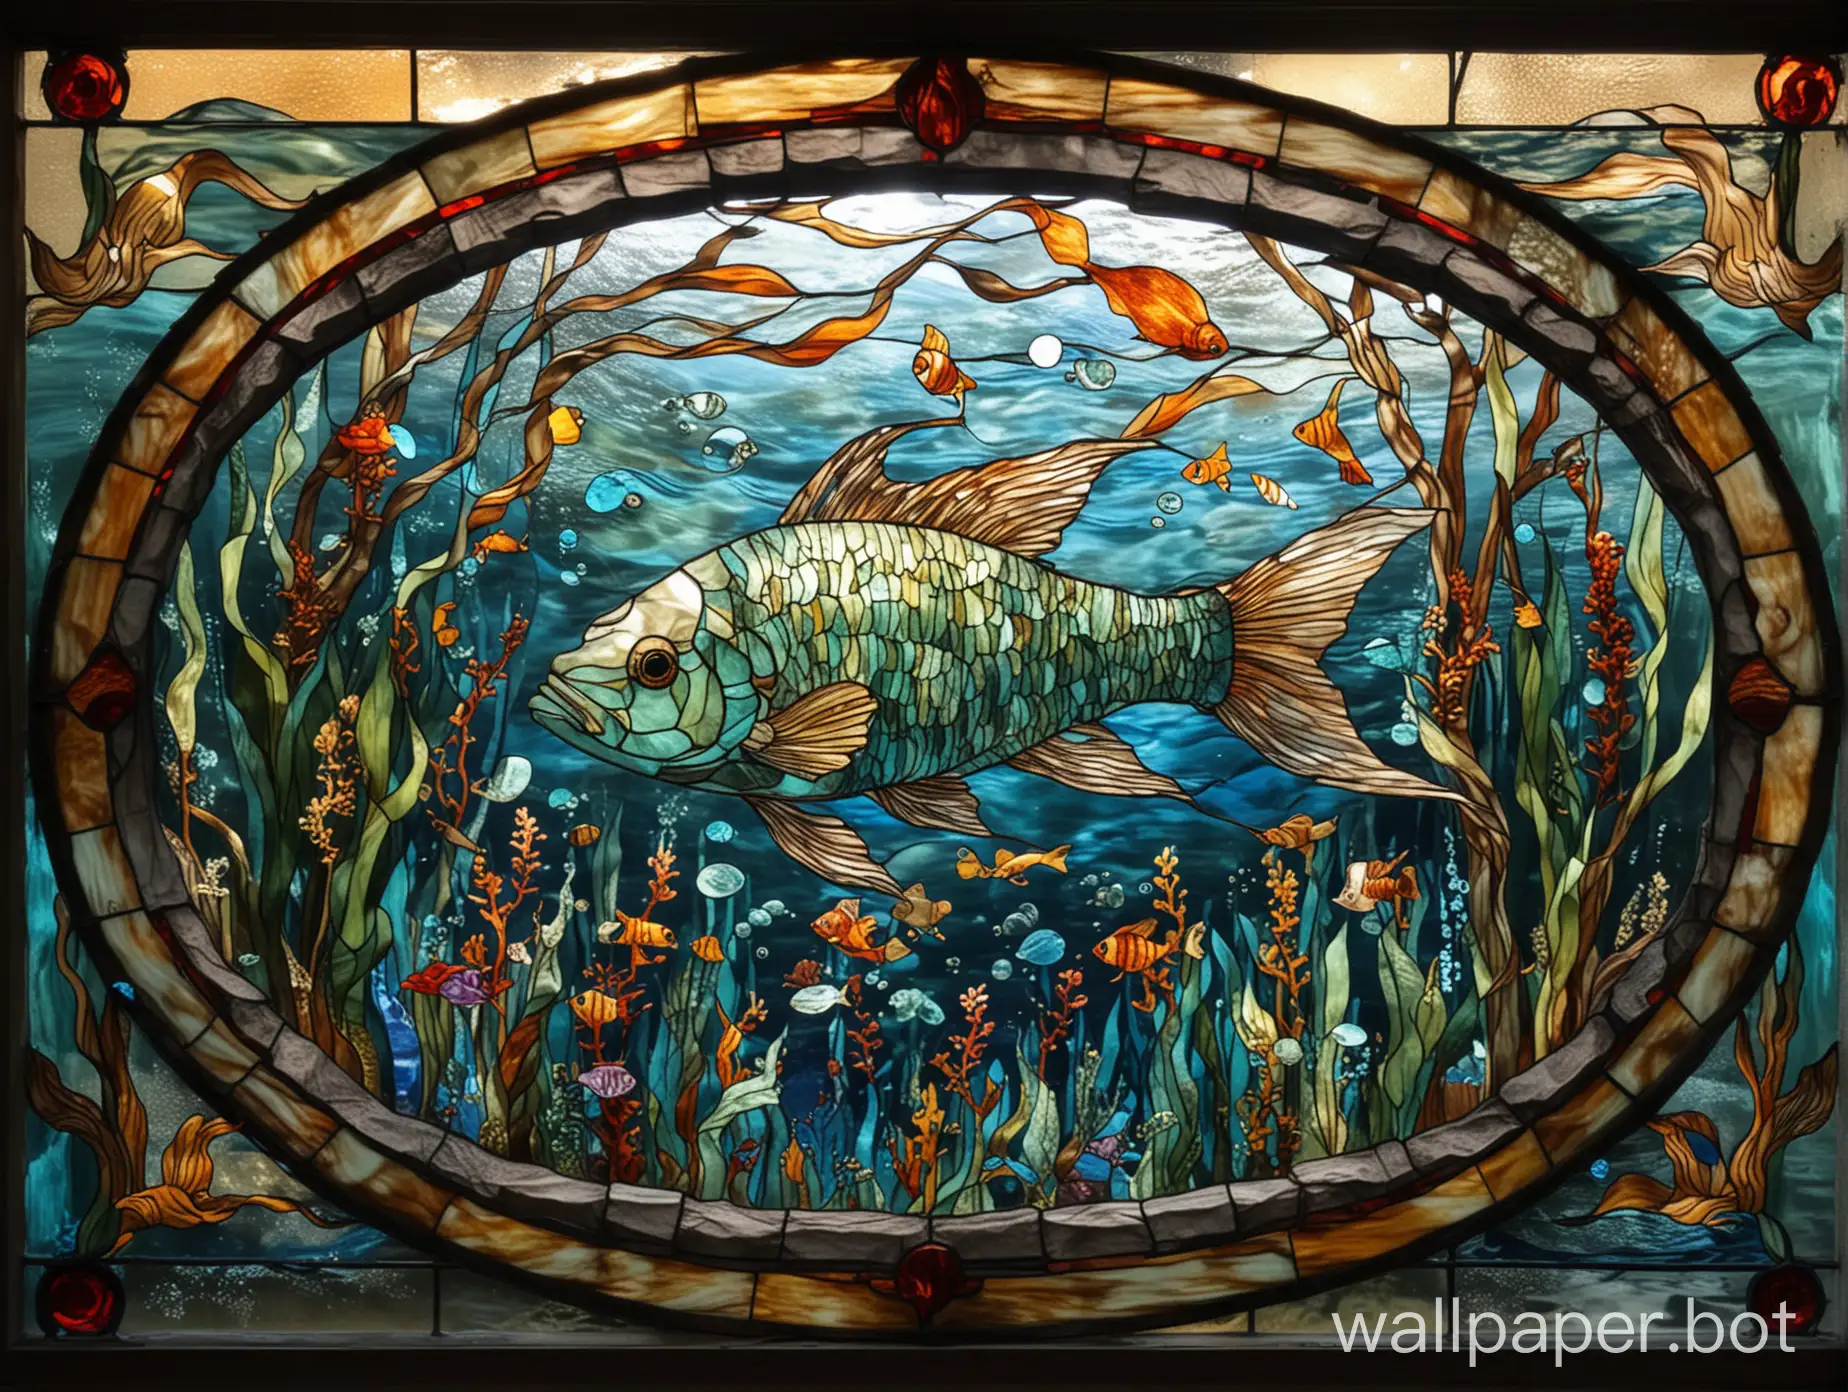 Enchanting-Stained-Glass-Window-of-a-Majestic-Underwater-Fish